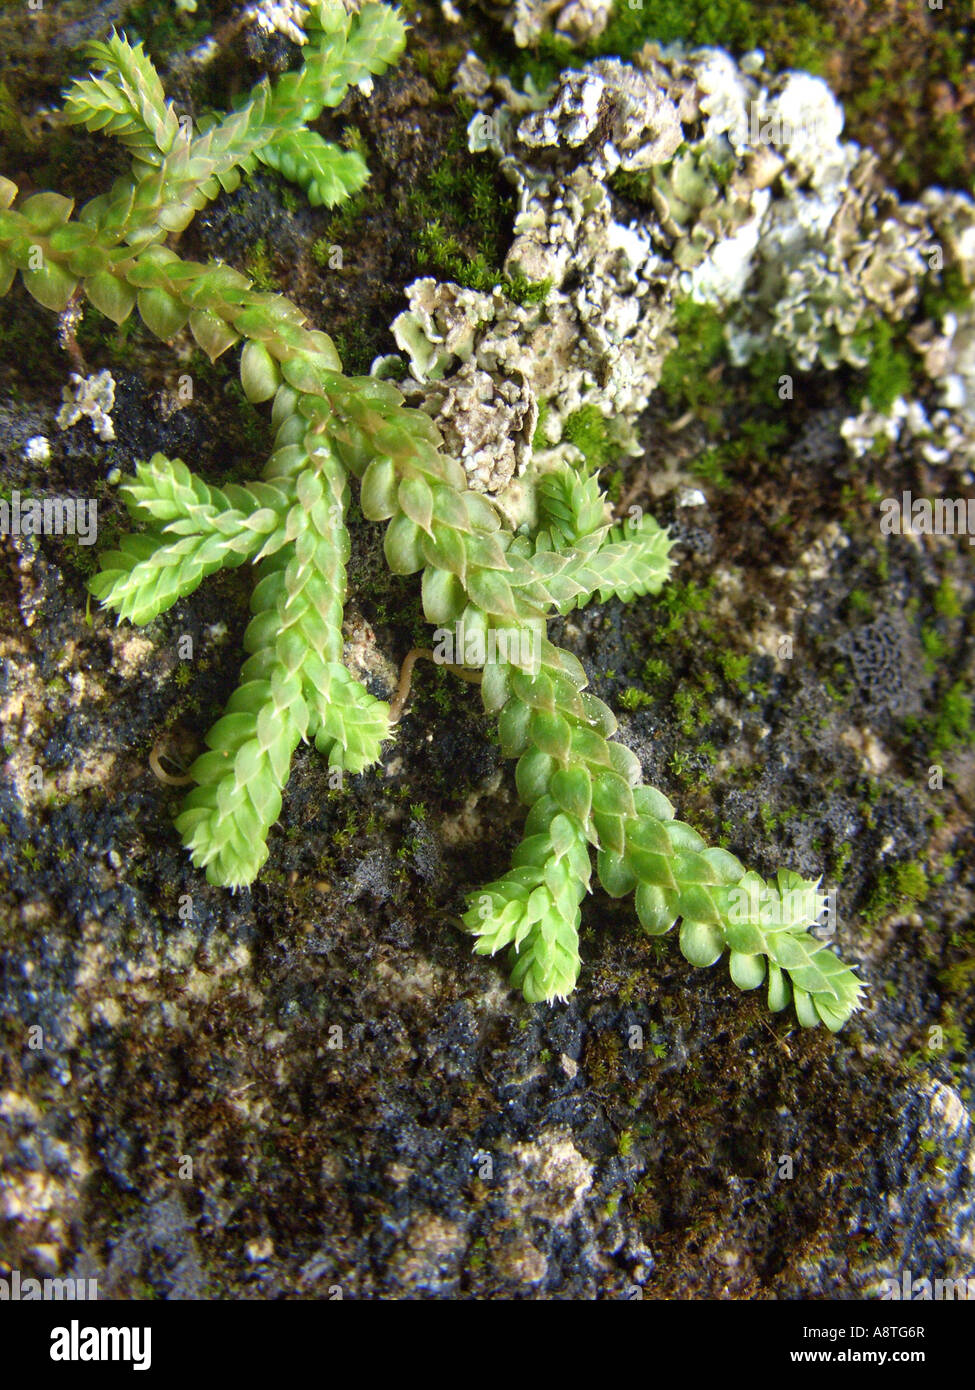 Toothed Clubmoss, Clubmoss, Denticulate selaginella, Denticulate spikemoss (Selaginella denticulata), sprouts, Spain, Balearen, Stock Photo